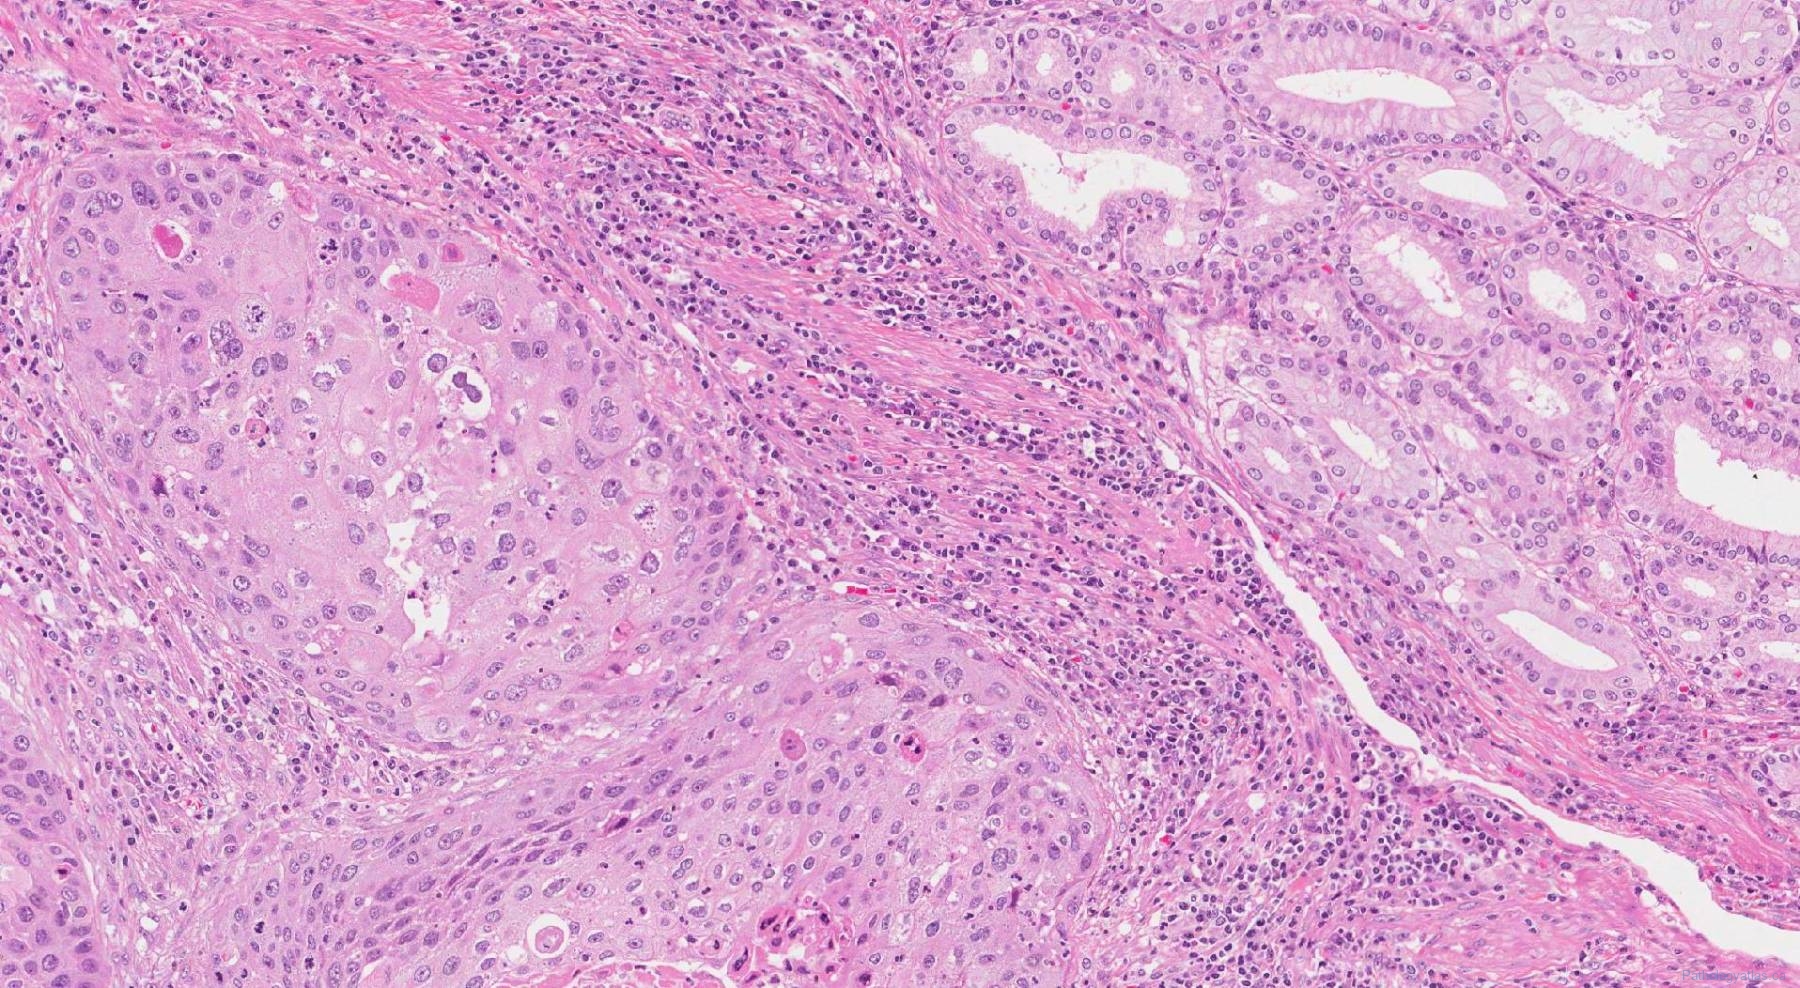 Squamous cell carcinoma of the gallbladder | Atlas of Pathology